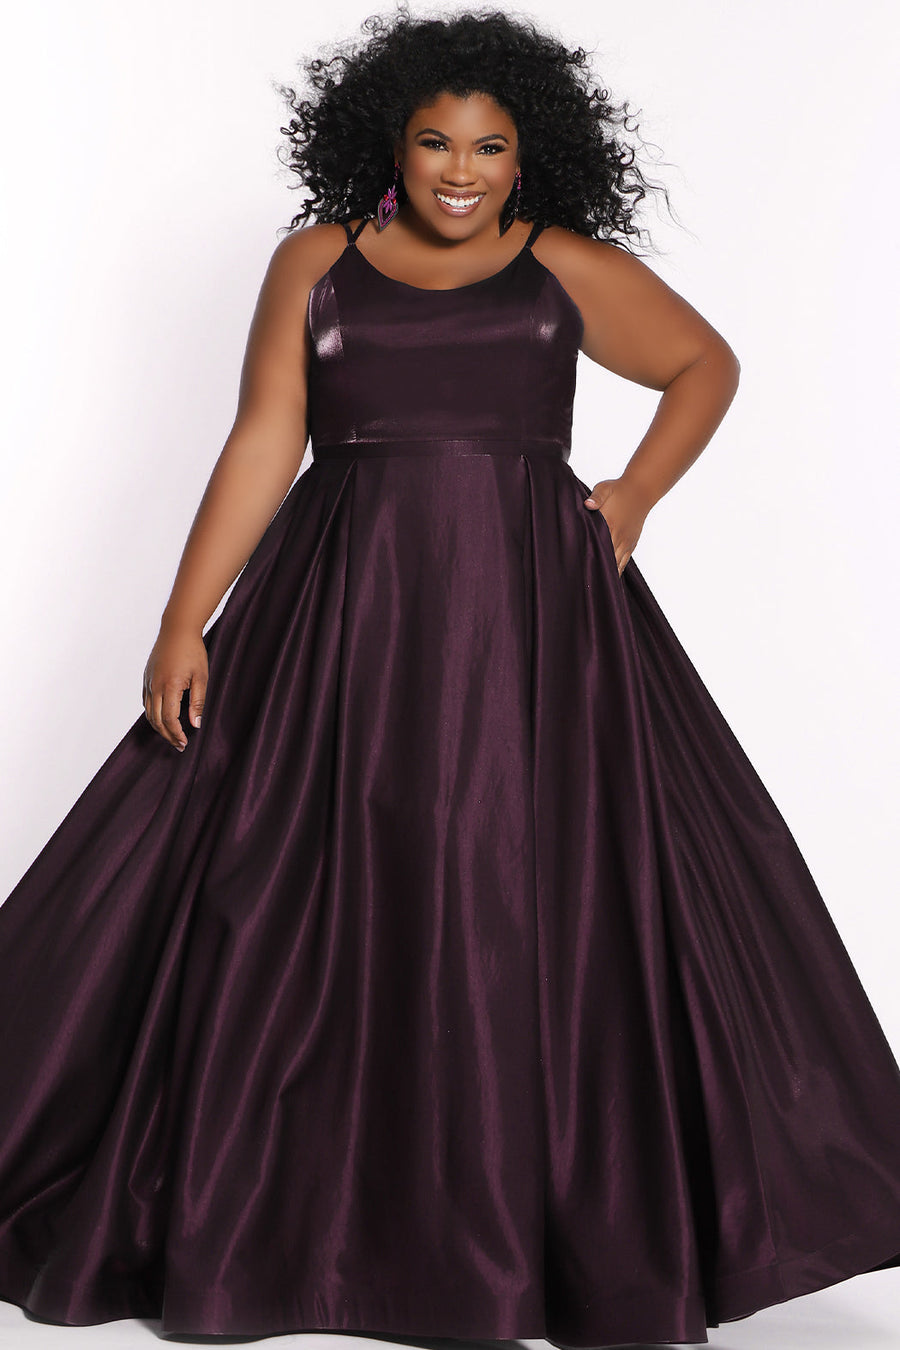 Tease Prom TE2226 Plus size a-line dress in berry purple with spaghetti straps and pockets. 